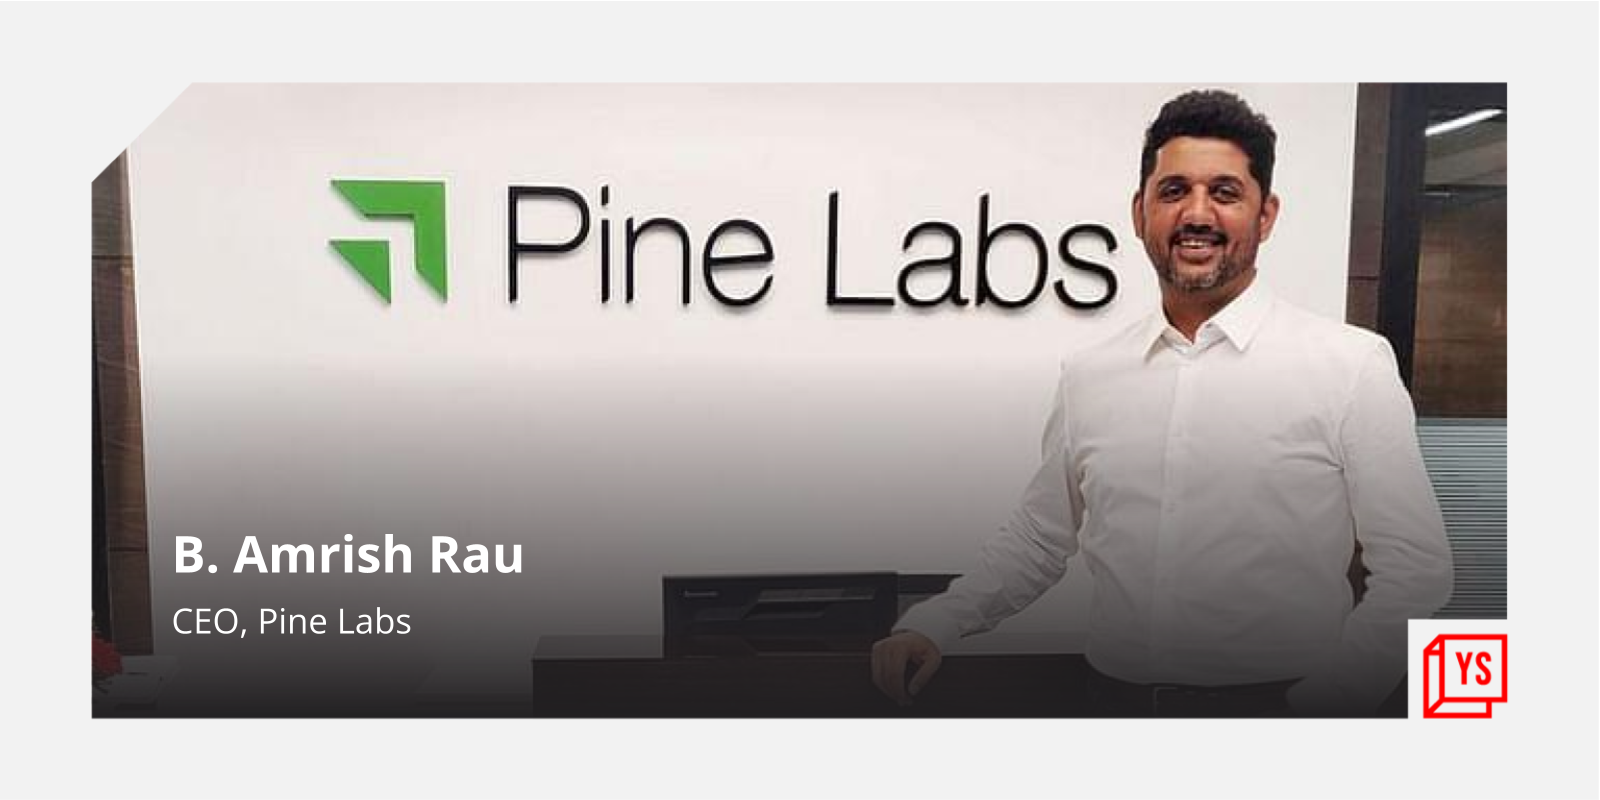 Pine Labs X.0 | Decoding Disruption LIVE on March 2nd - YouTube